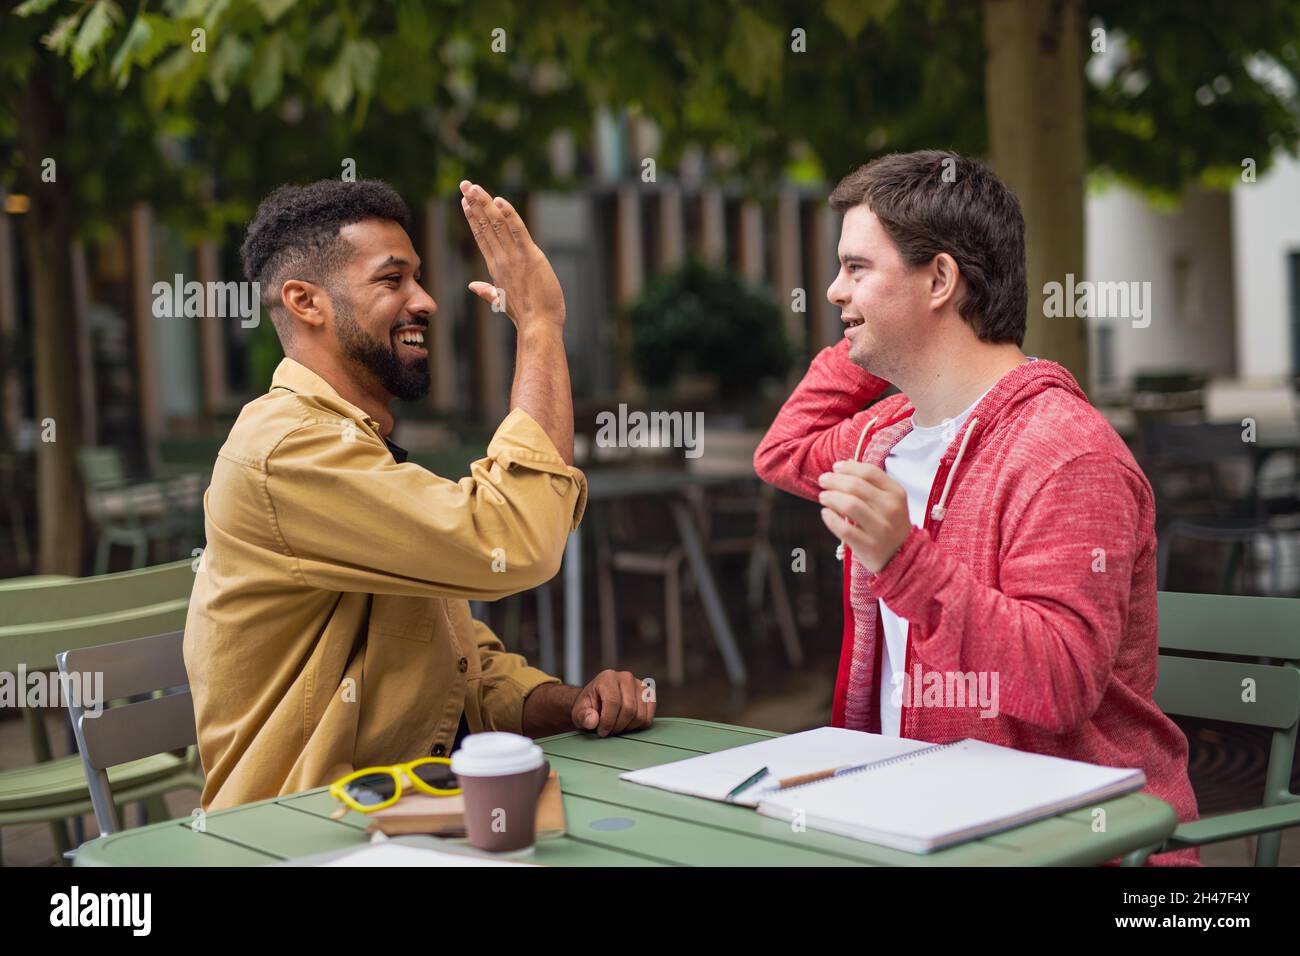 Young man with Down syndrome with mentoring friend sitting outdoors in cafe celebrating success. Stock Photo